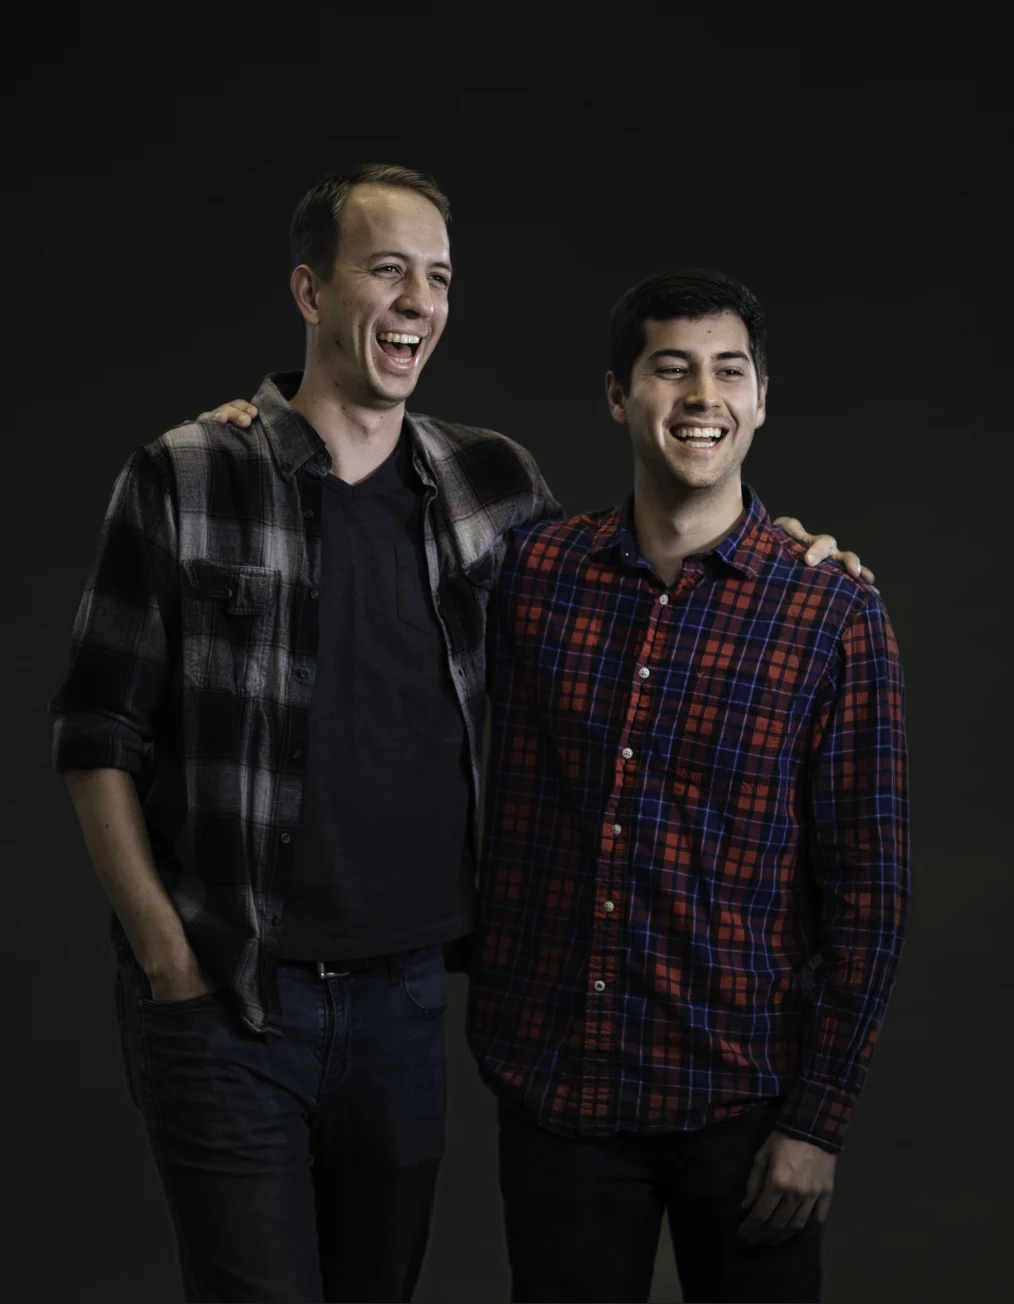 Two men with light skin tones laugh and smile while wearing plaid dress shirts and jeans.